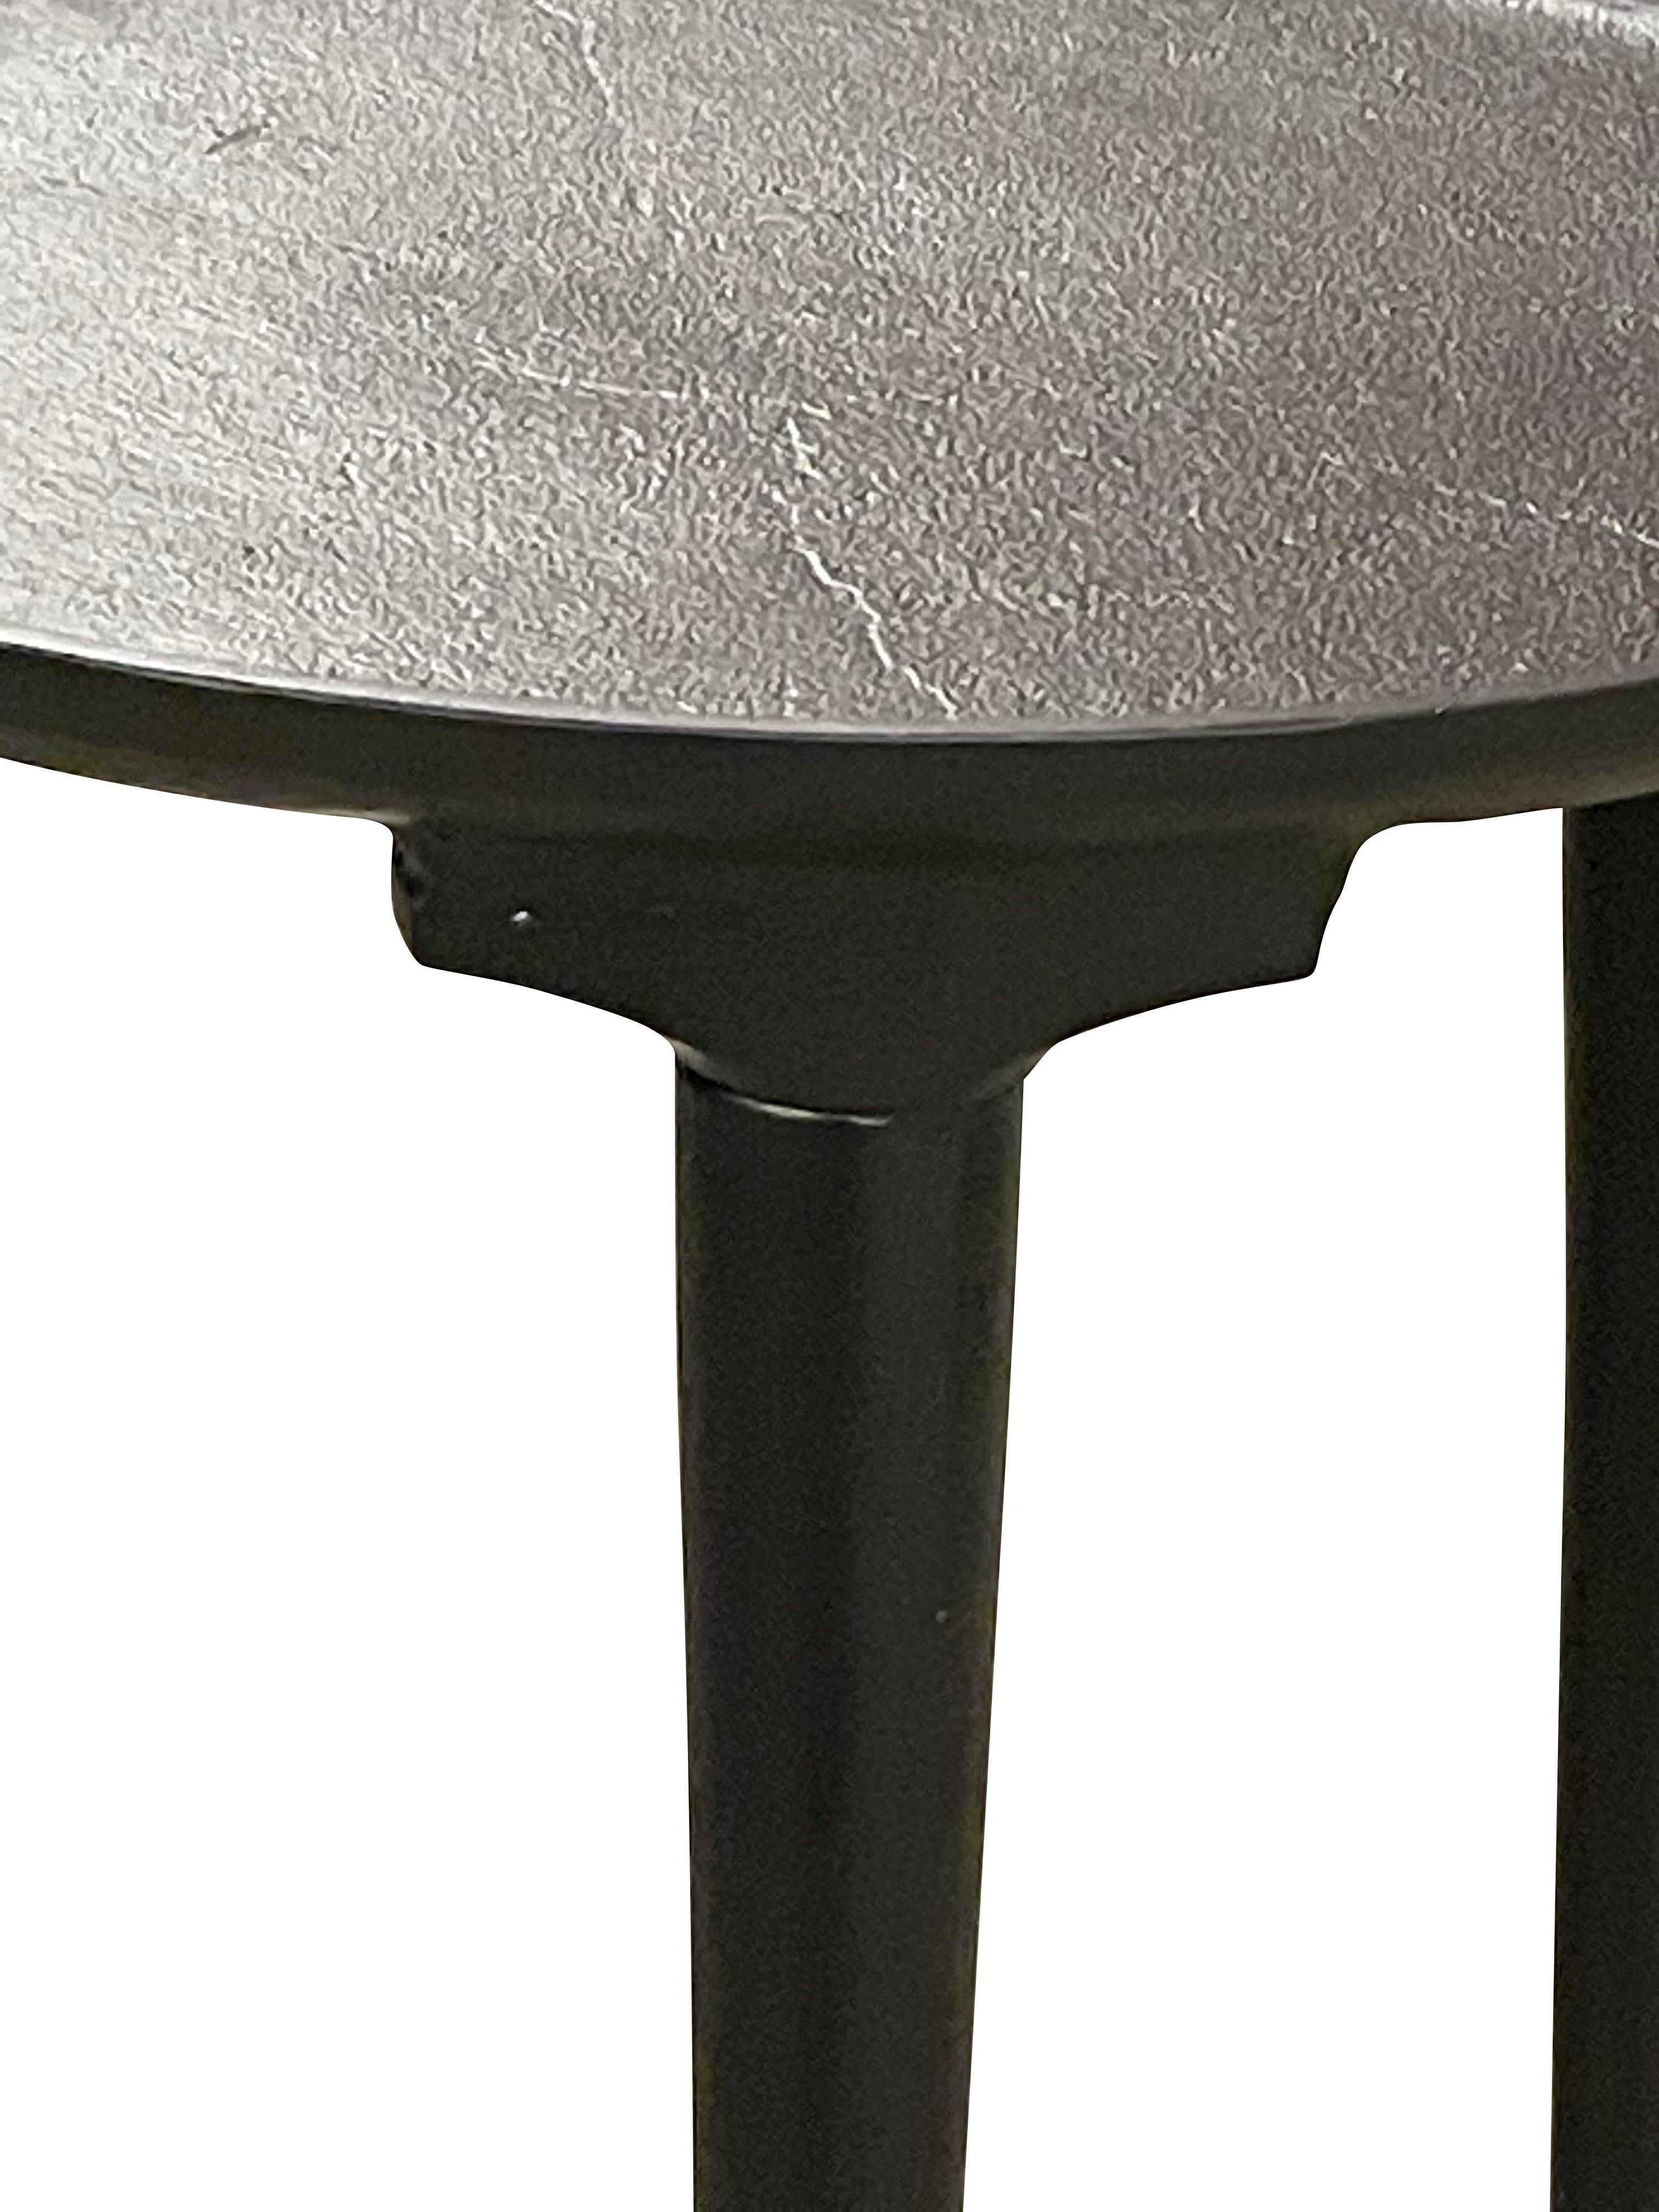 Contemporary Indian black iron round coffee table.
Three tapered legs with T shape designed top.
Slightly textured finish.
Raised lip detail on top border.
Also available as a coffee table (F2913)
ARRIVAL APRIL